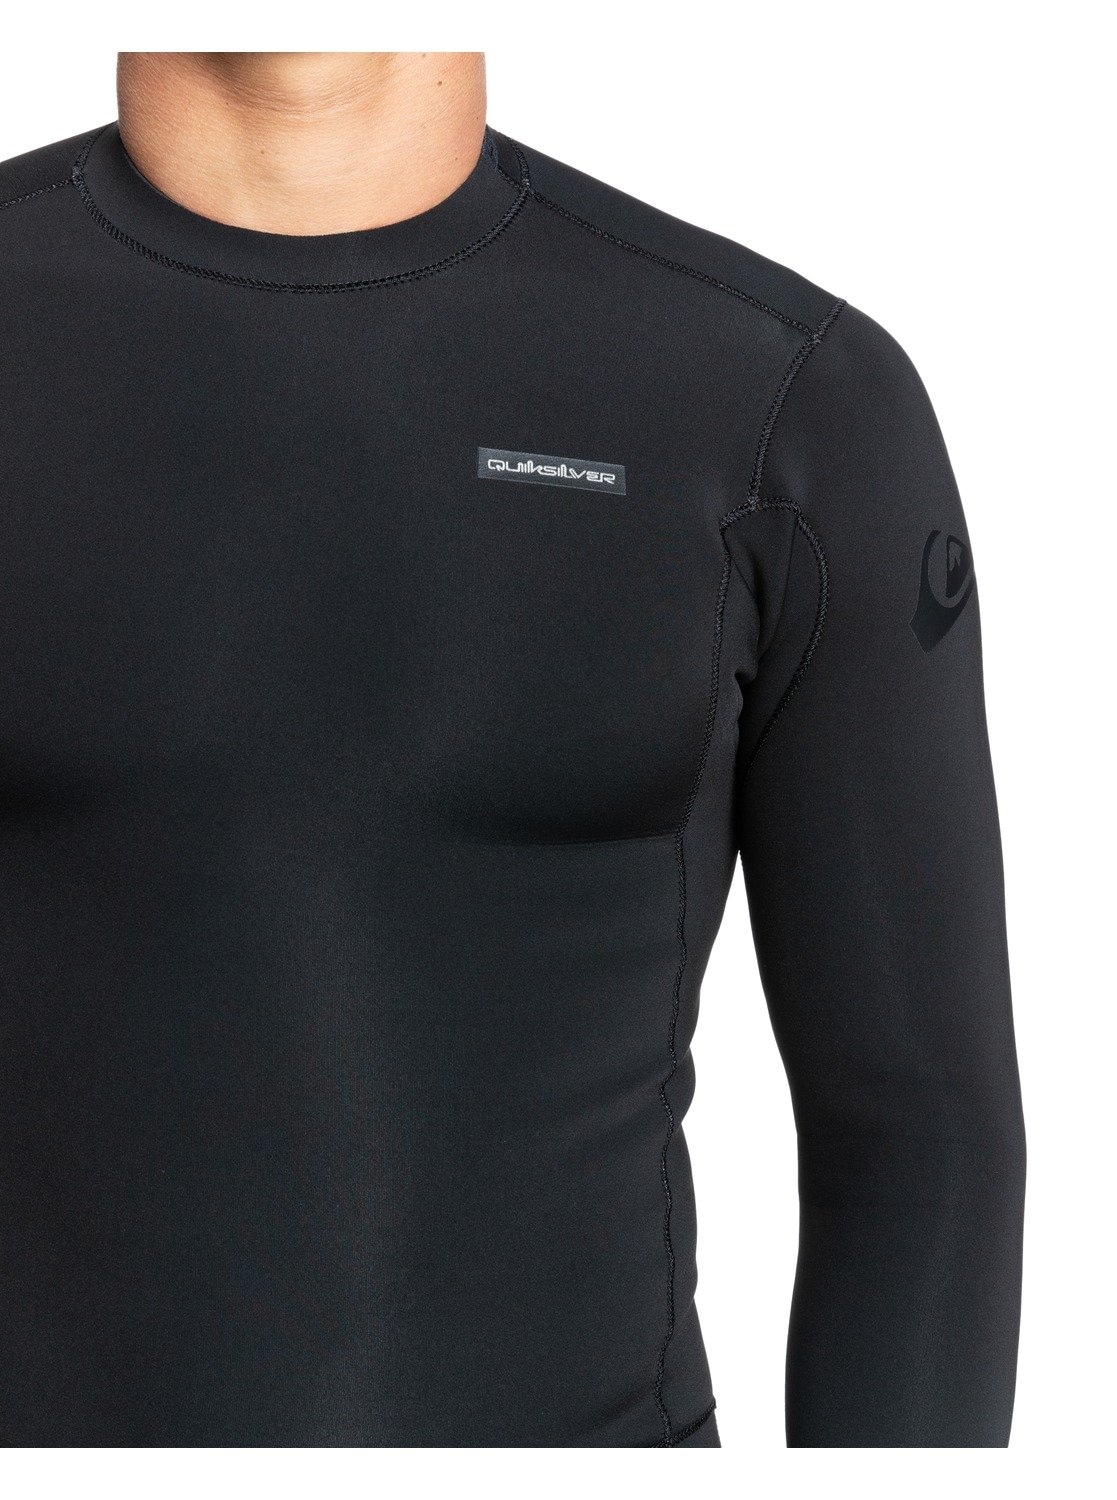 Quiksilver Neoprenanzug »2mm Everyday ♕ bei Sessions«